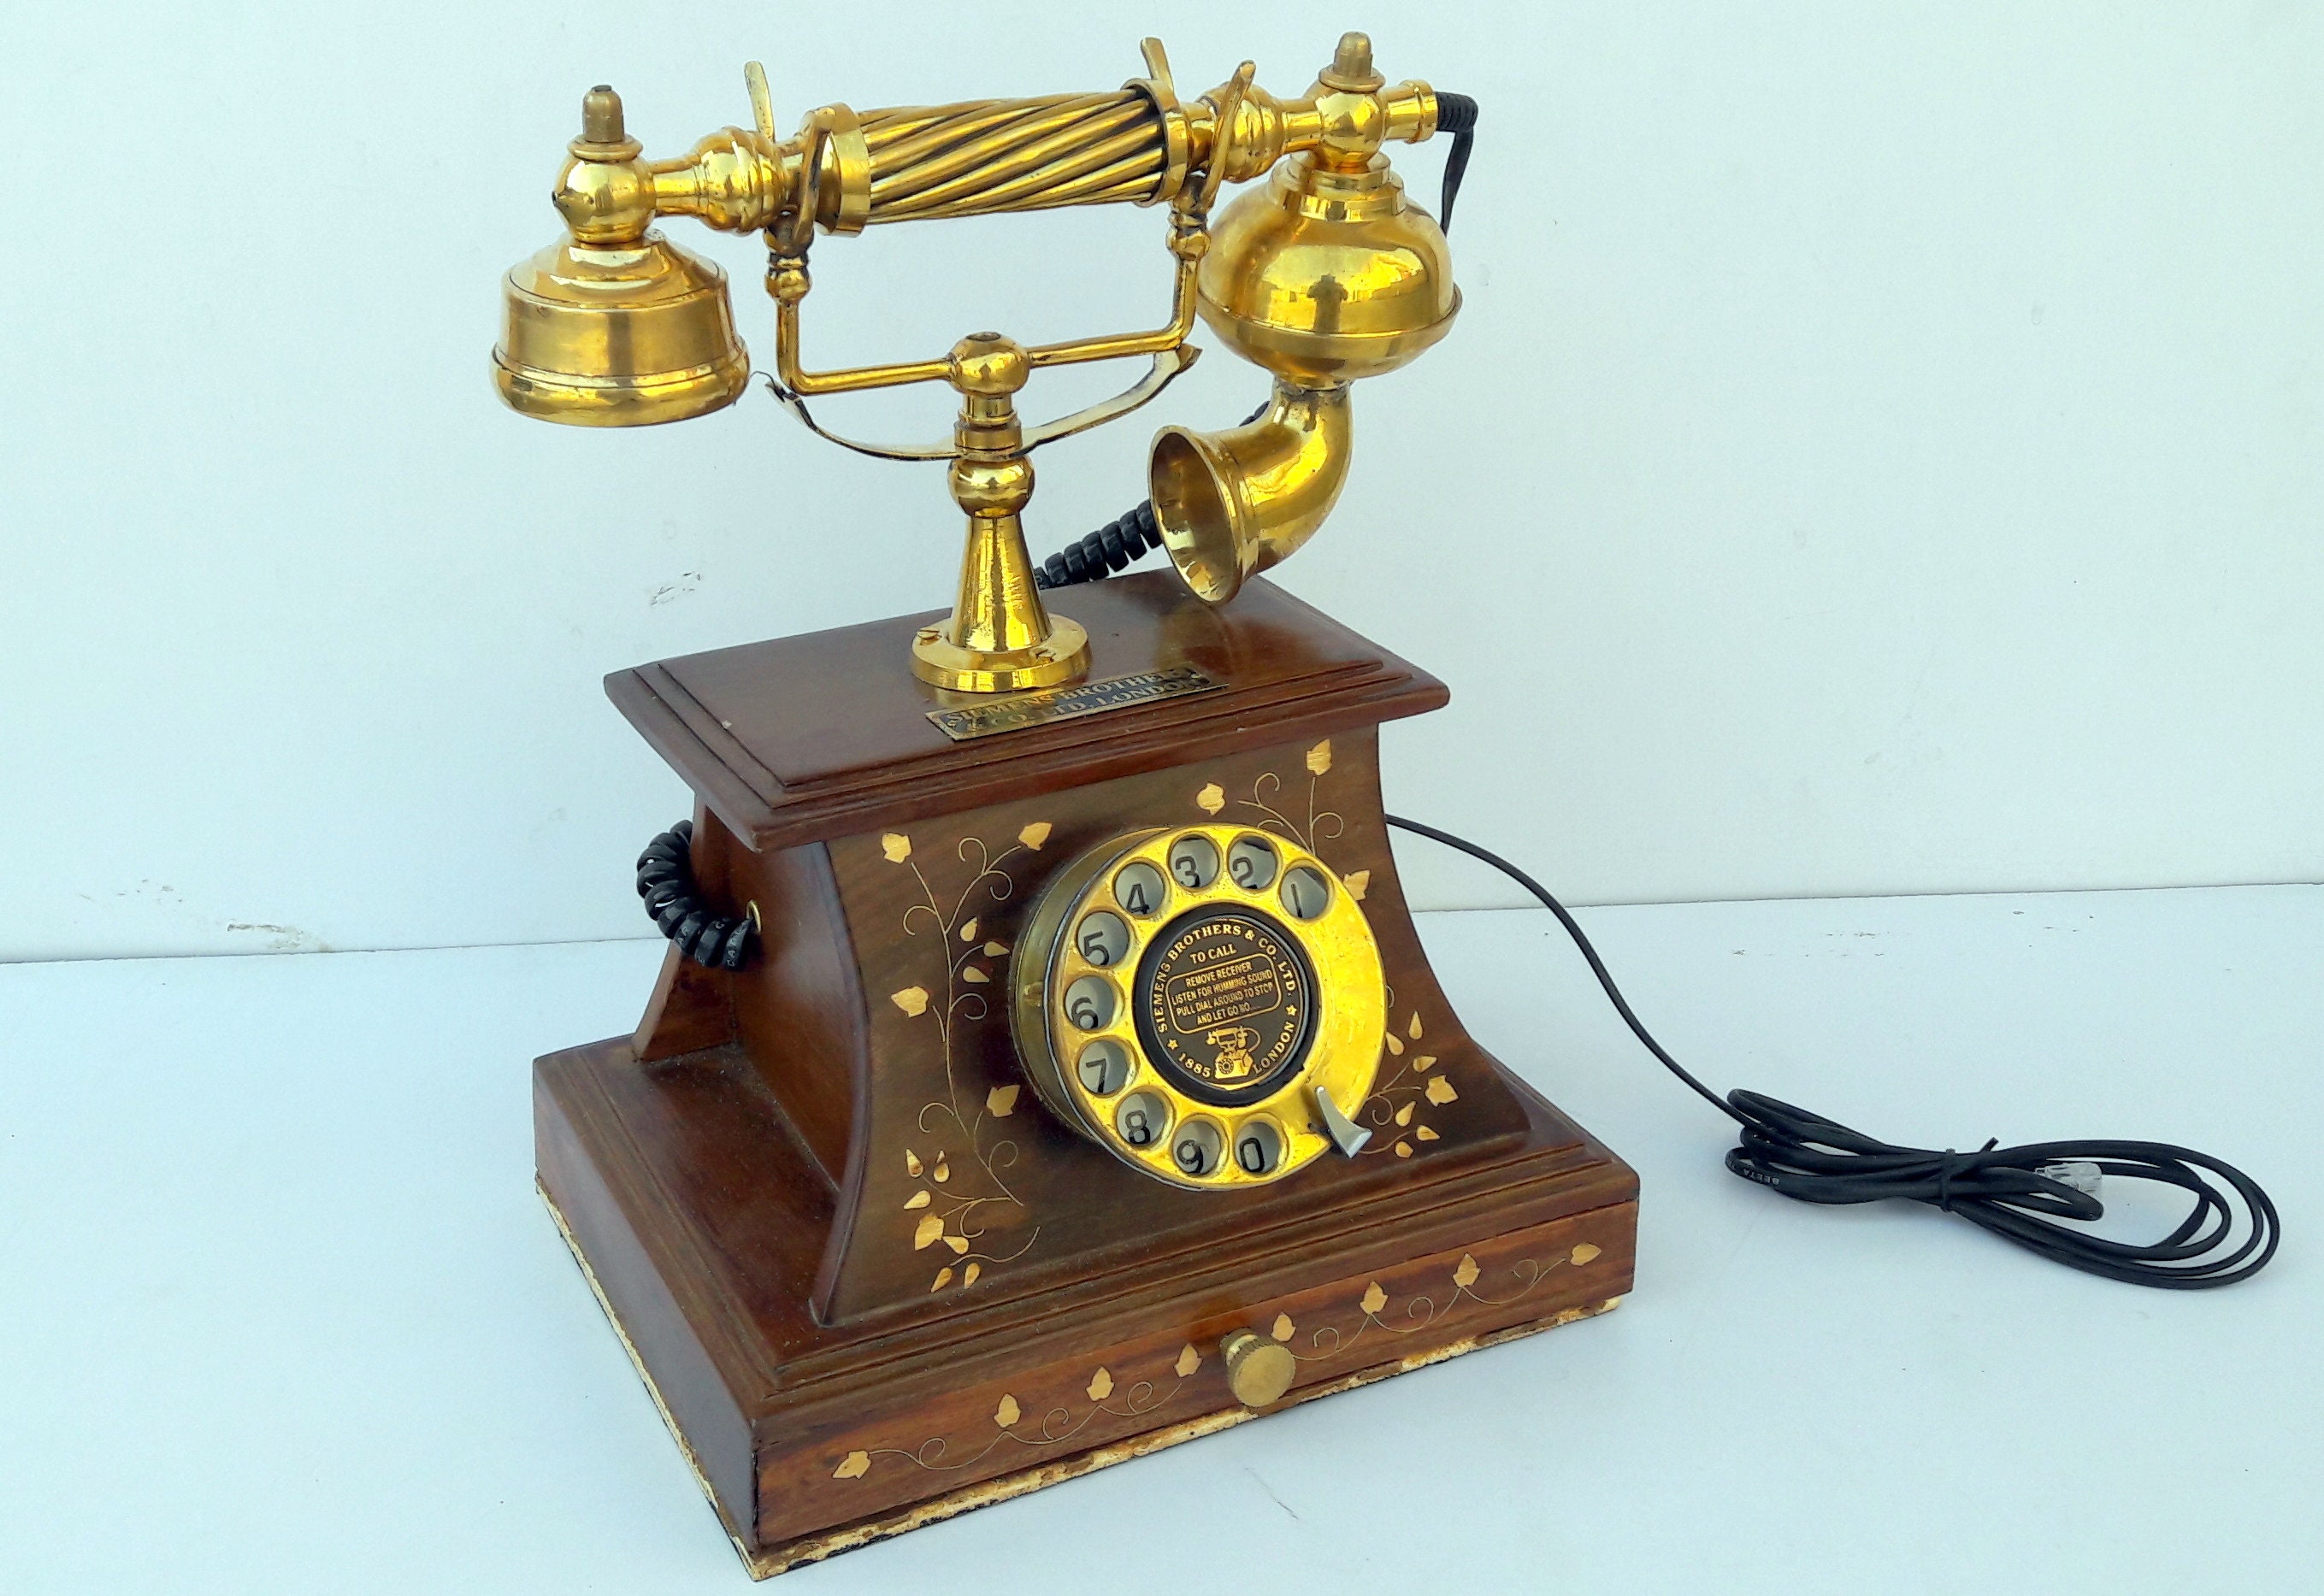 Beautiful Wooden Clock Vintage Antique Nautical Solid Victorian Brass Rotary Dial Working Telephone